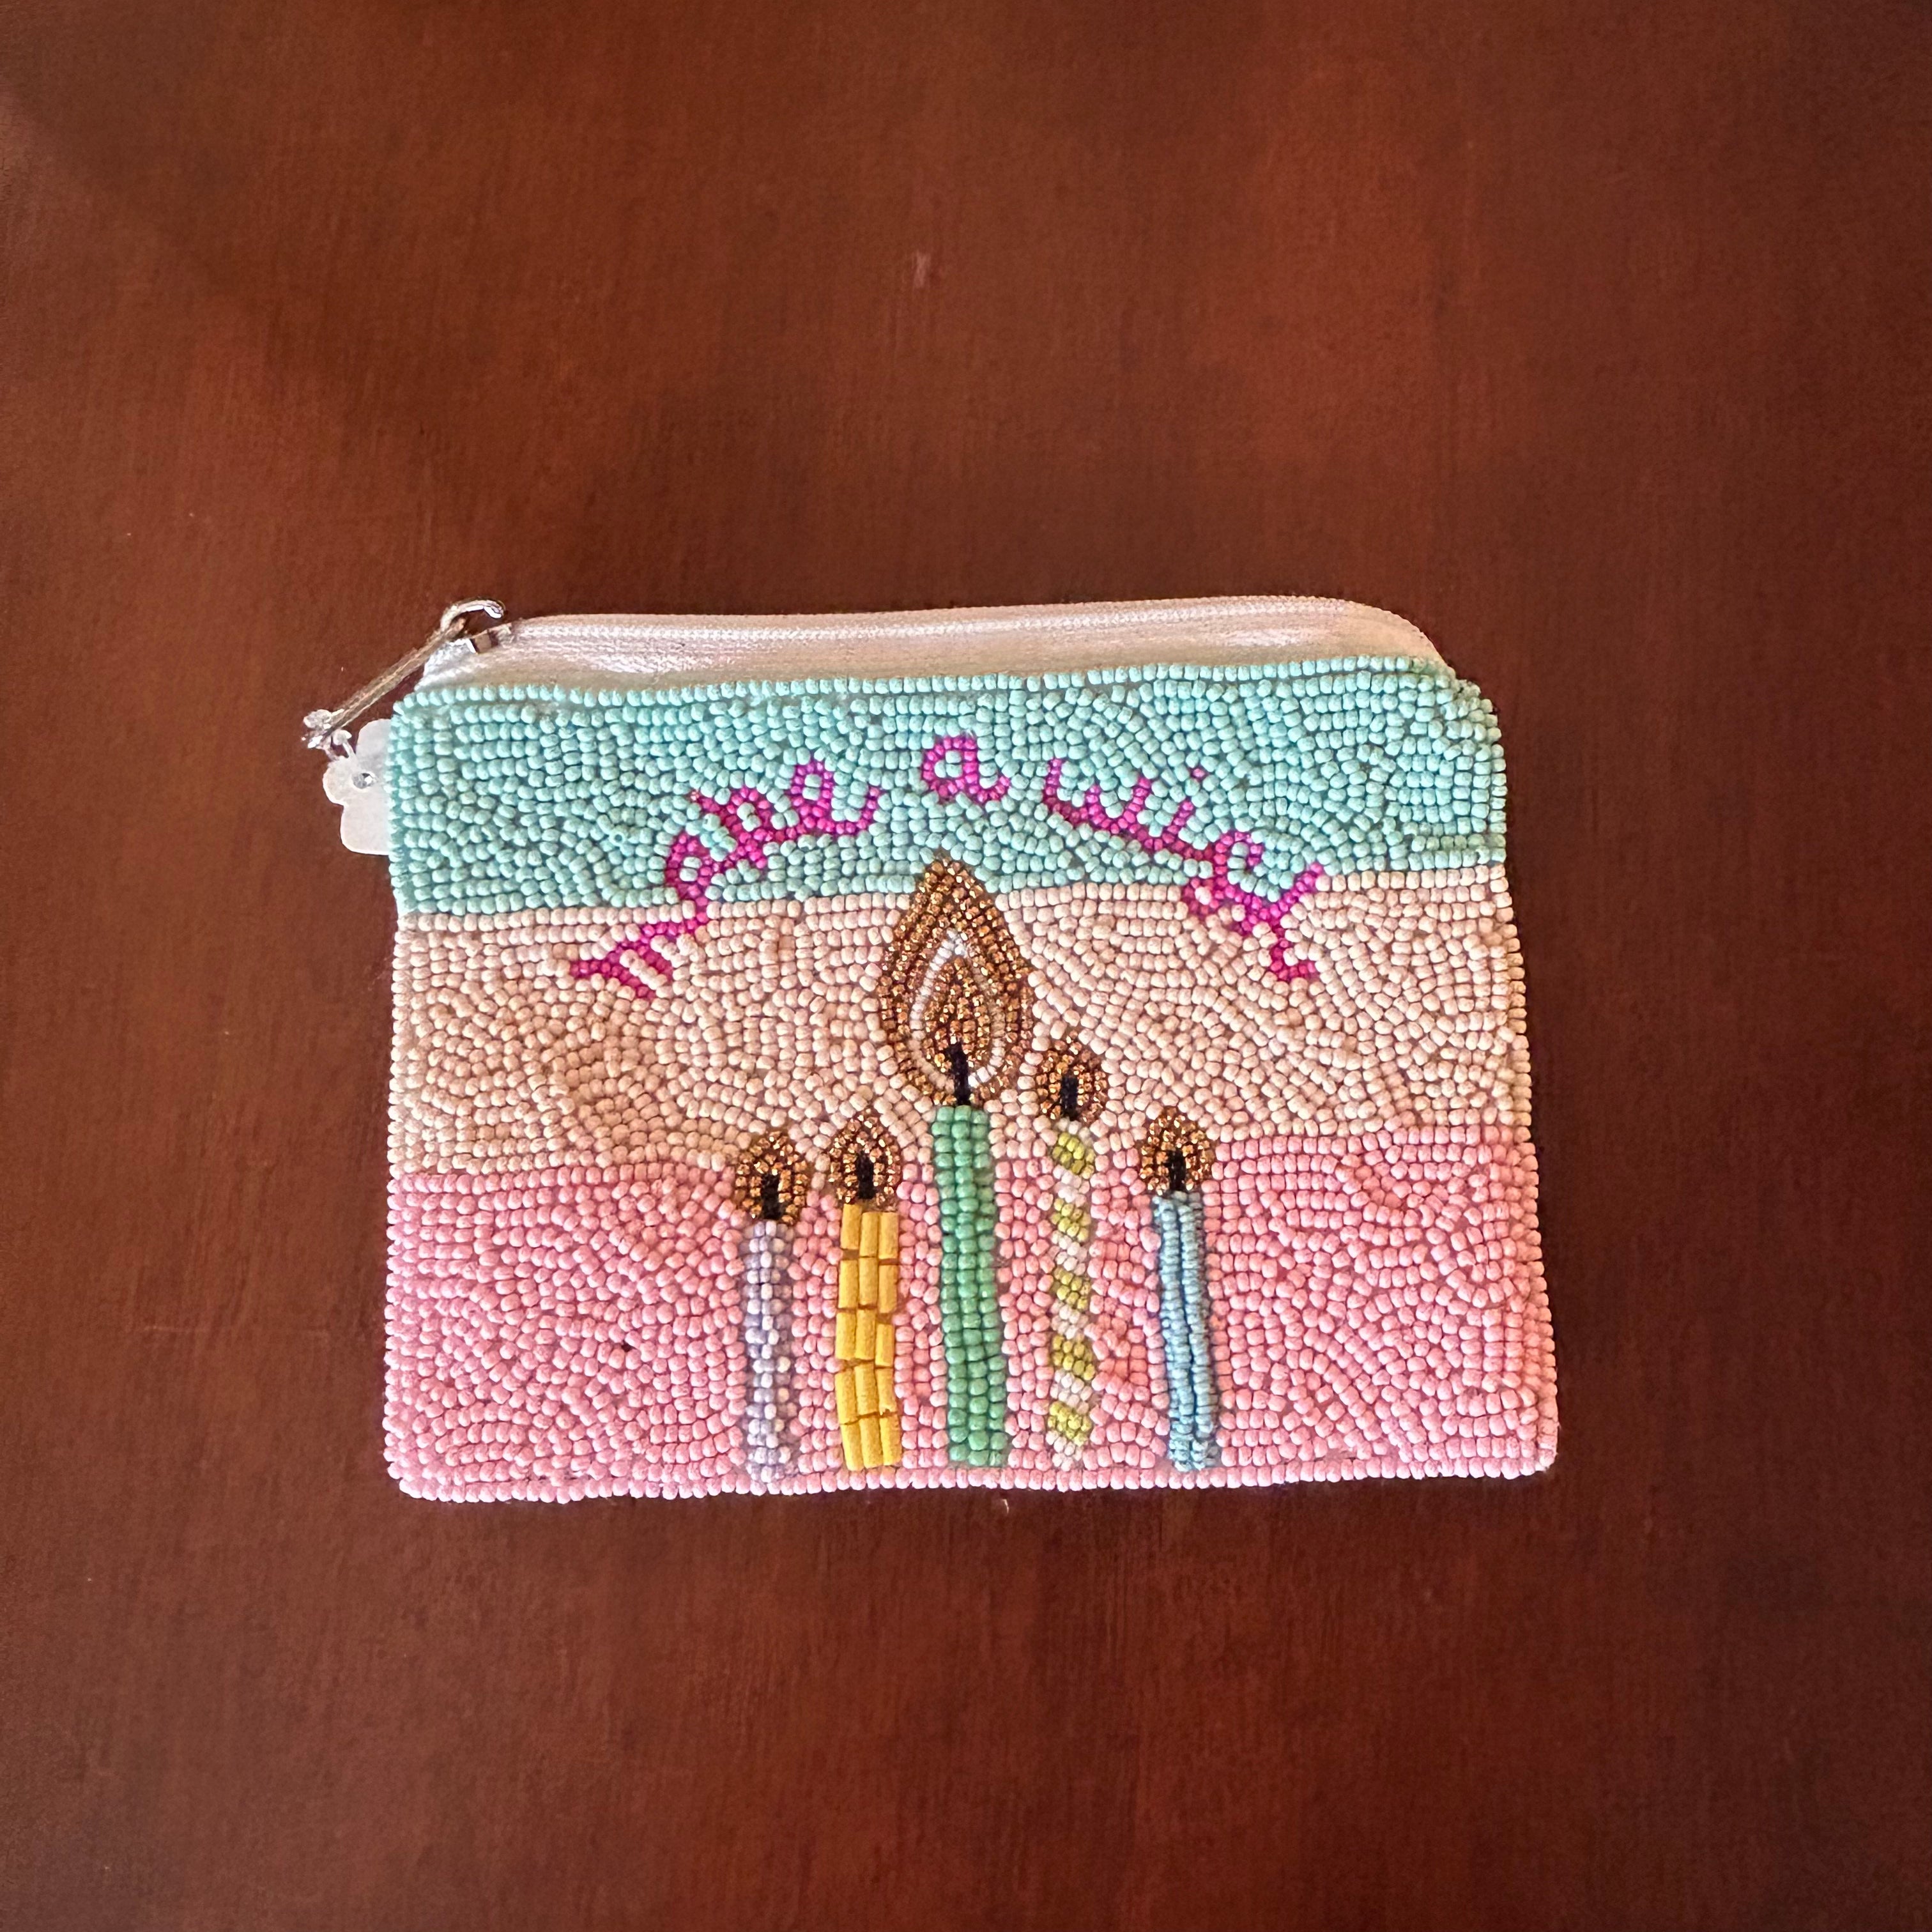 Beaded Pouches / Change Purses